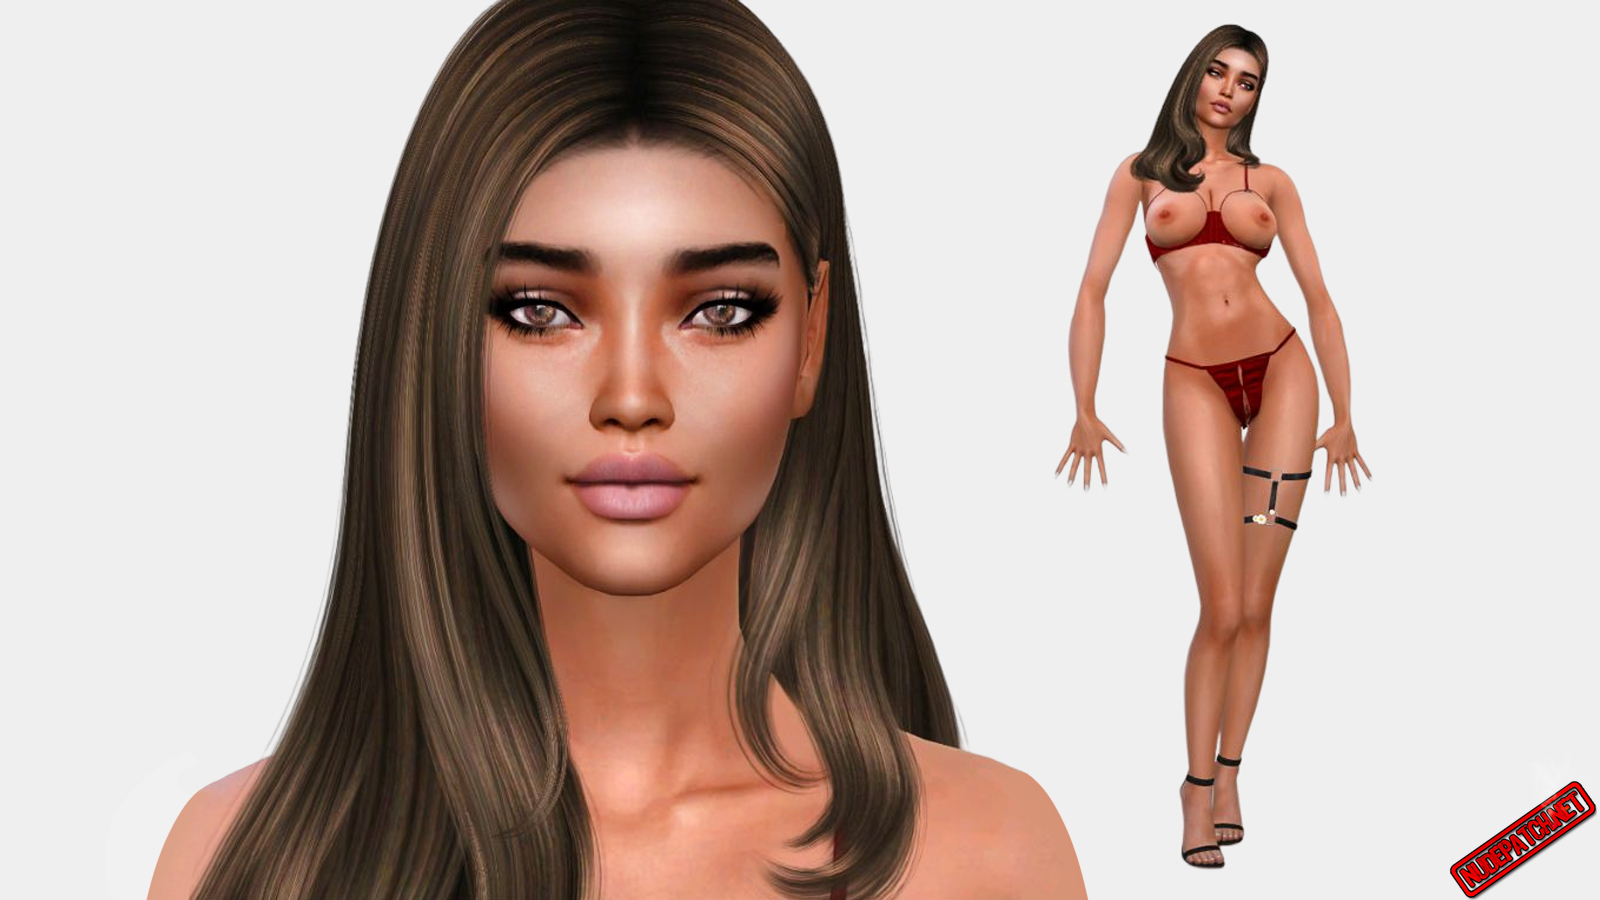 denise brisco add the sims nude patch photo